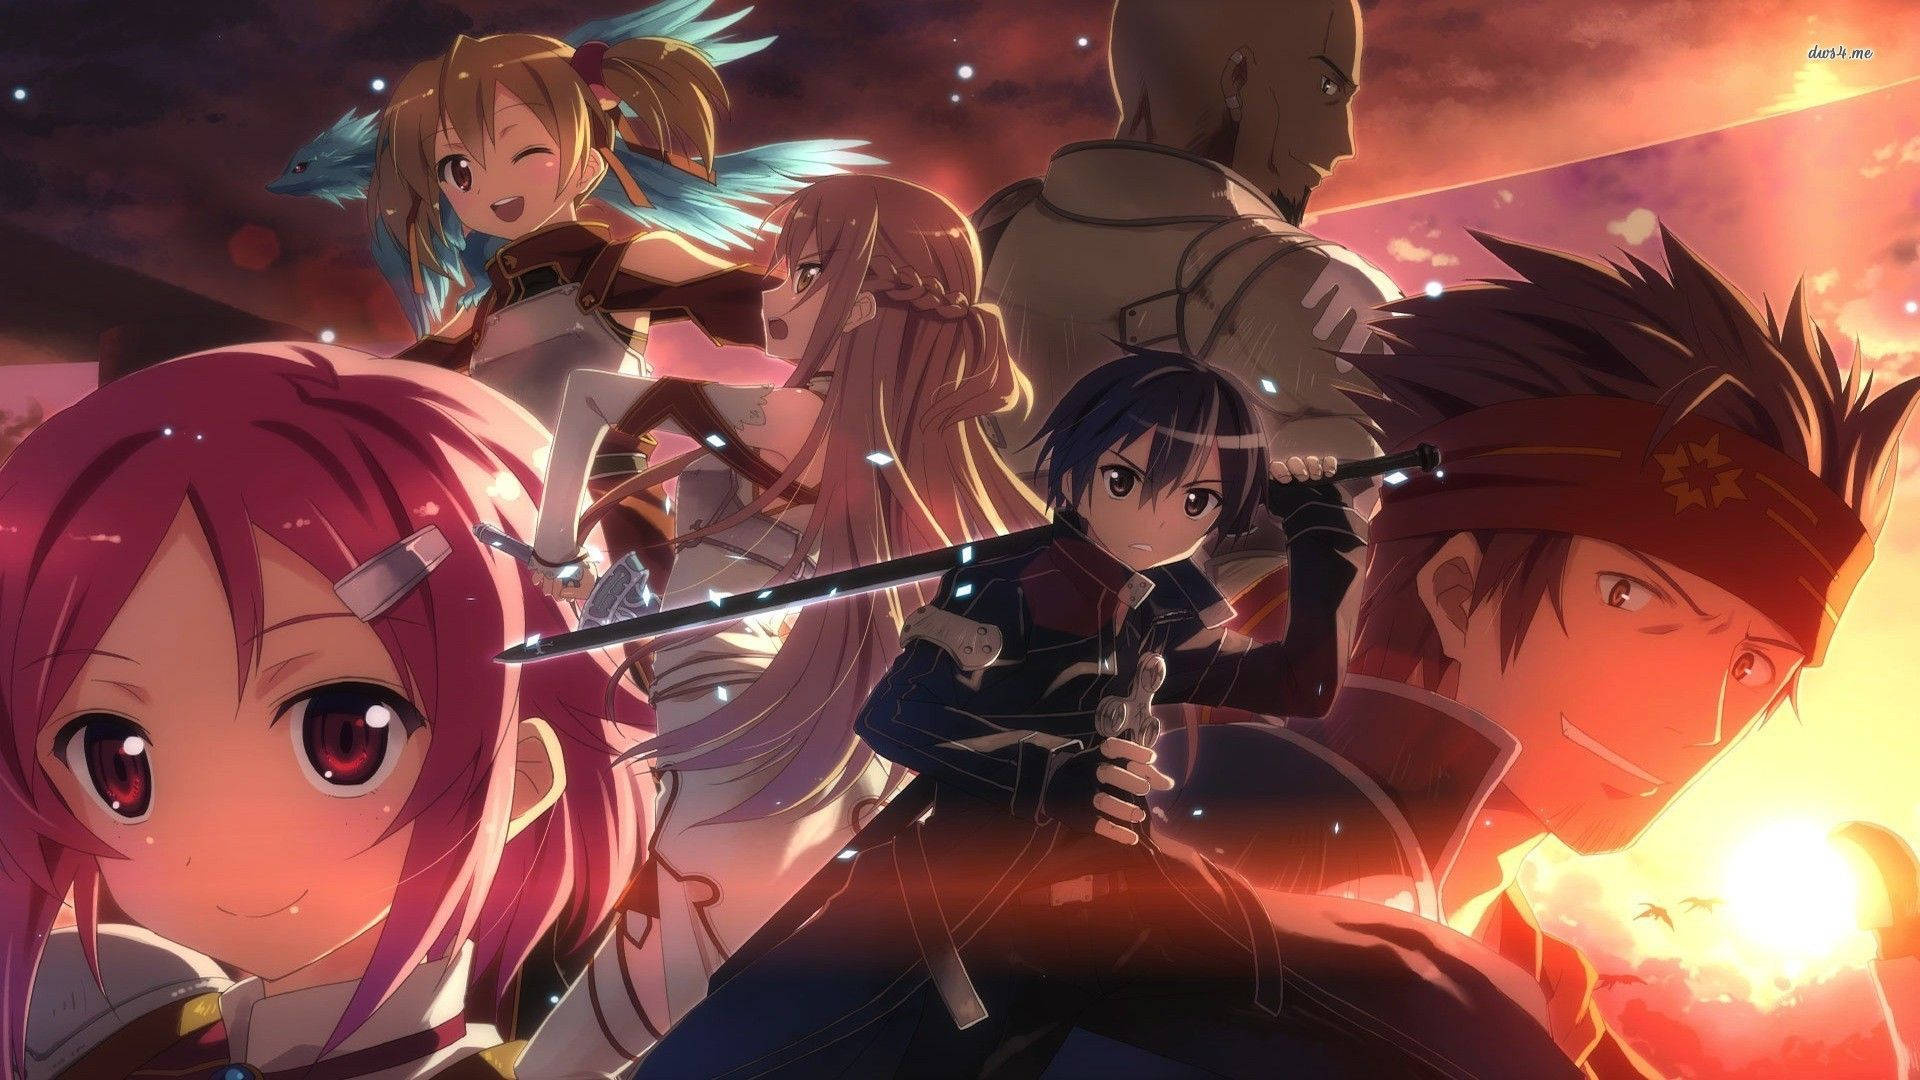 Sao Characters On Red Sky Background